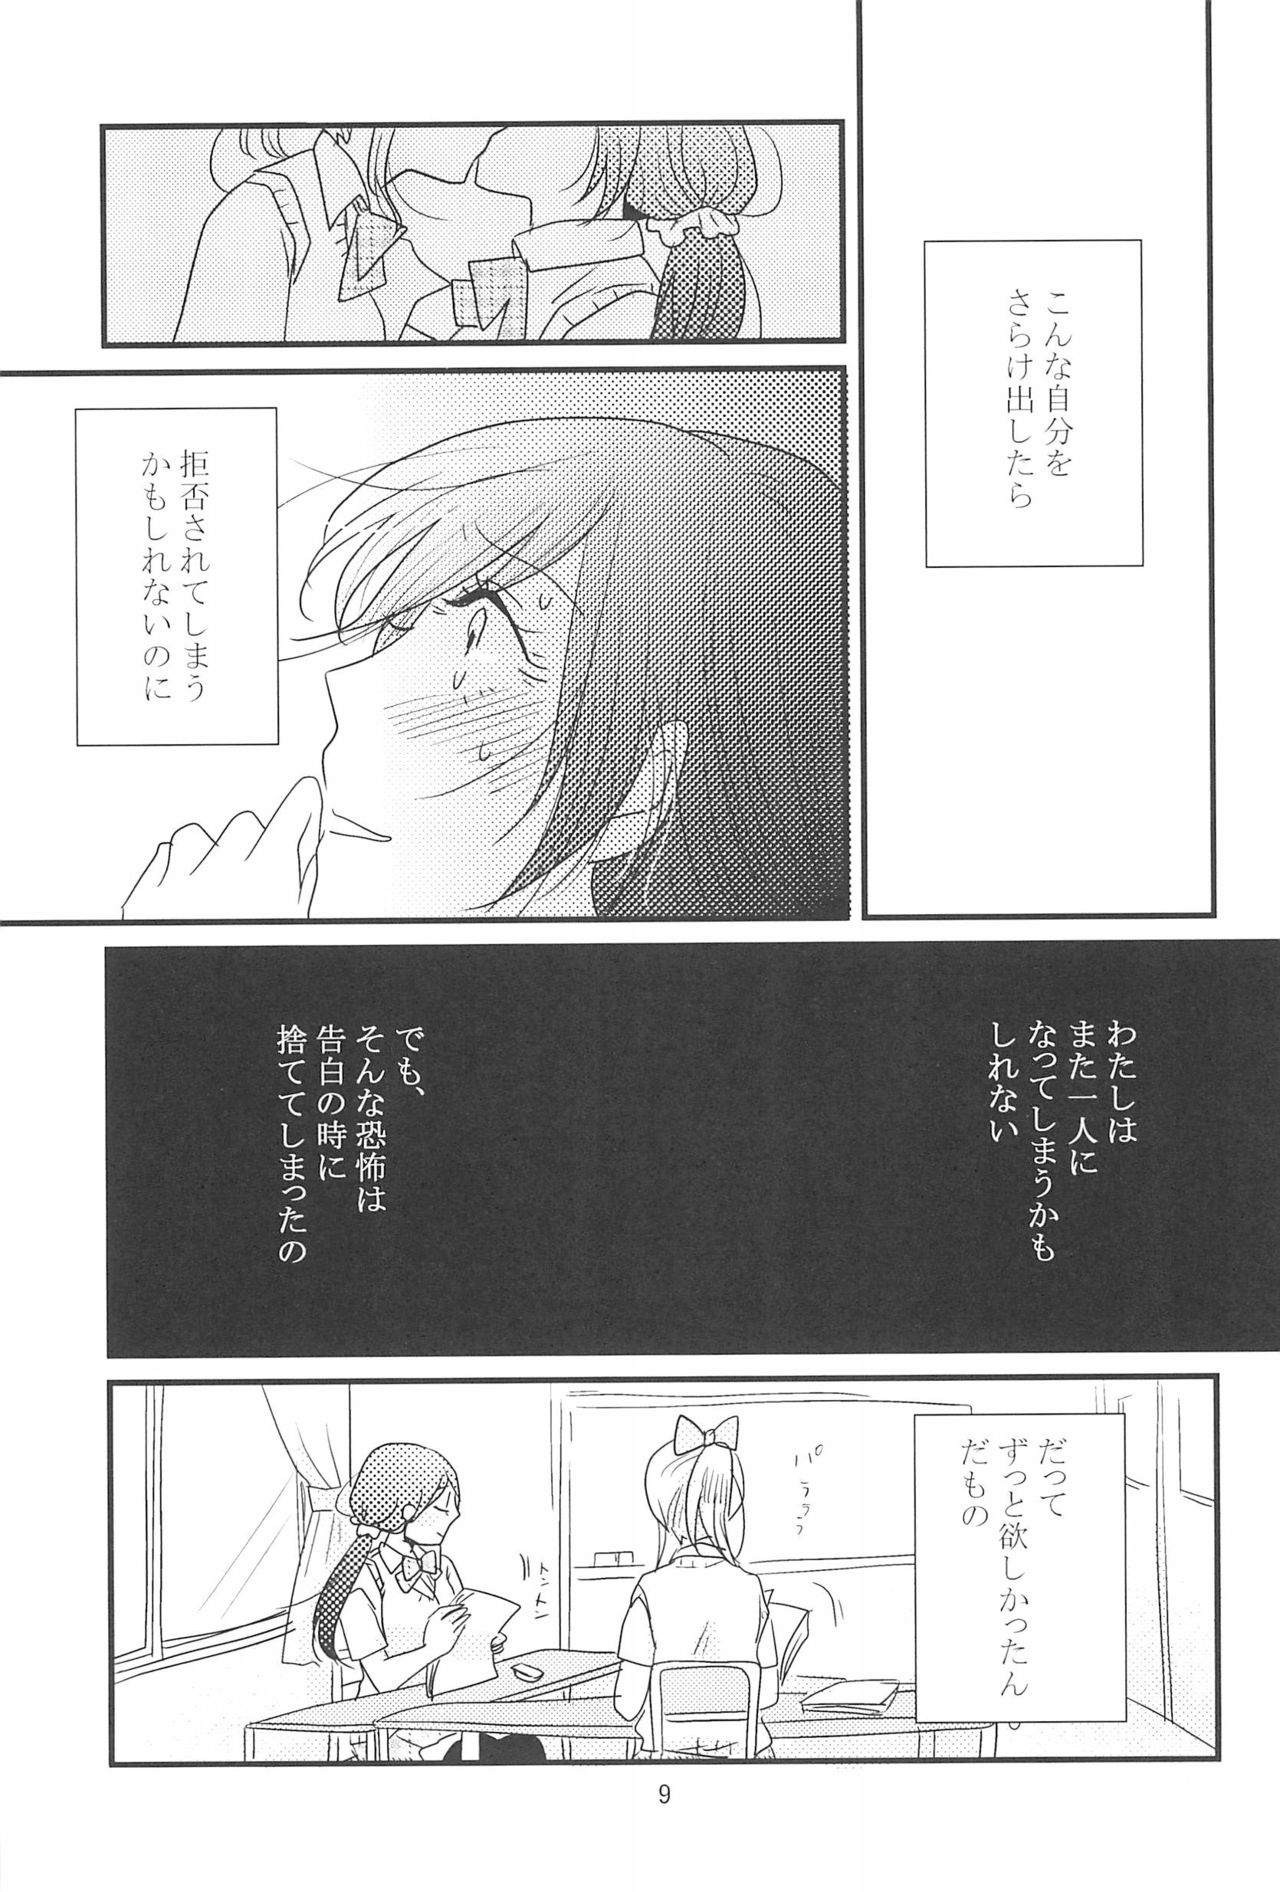 (C90) [BK*N2 (Mikawa Miso)] HAPPY GO LUCKY DAYS (Love Live!) page 13 full